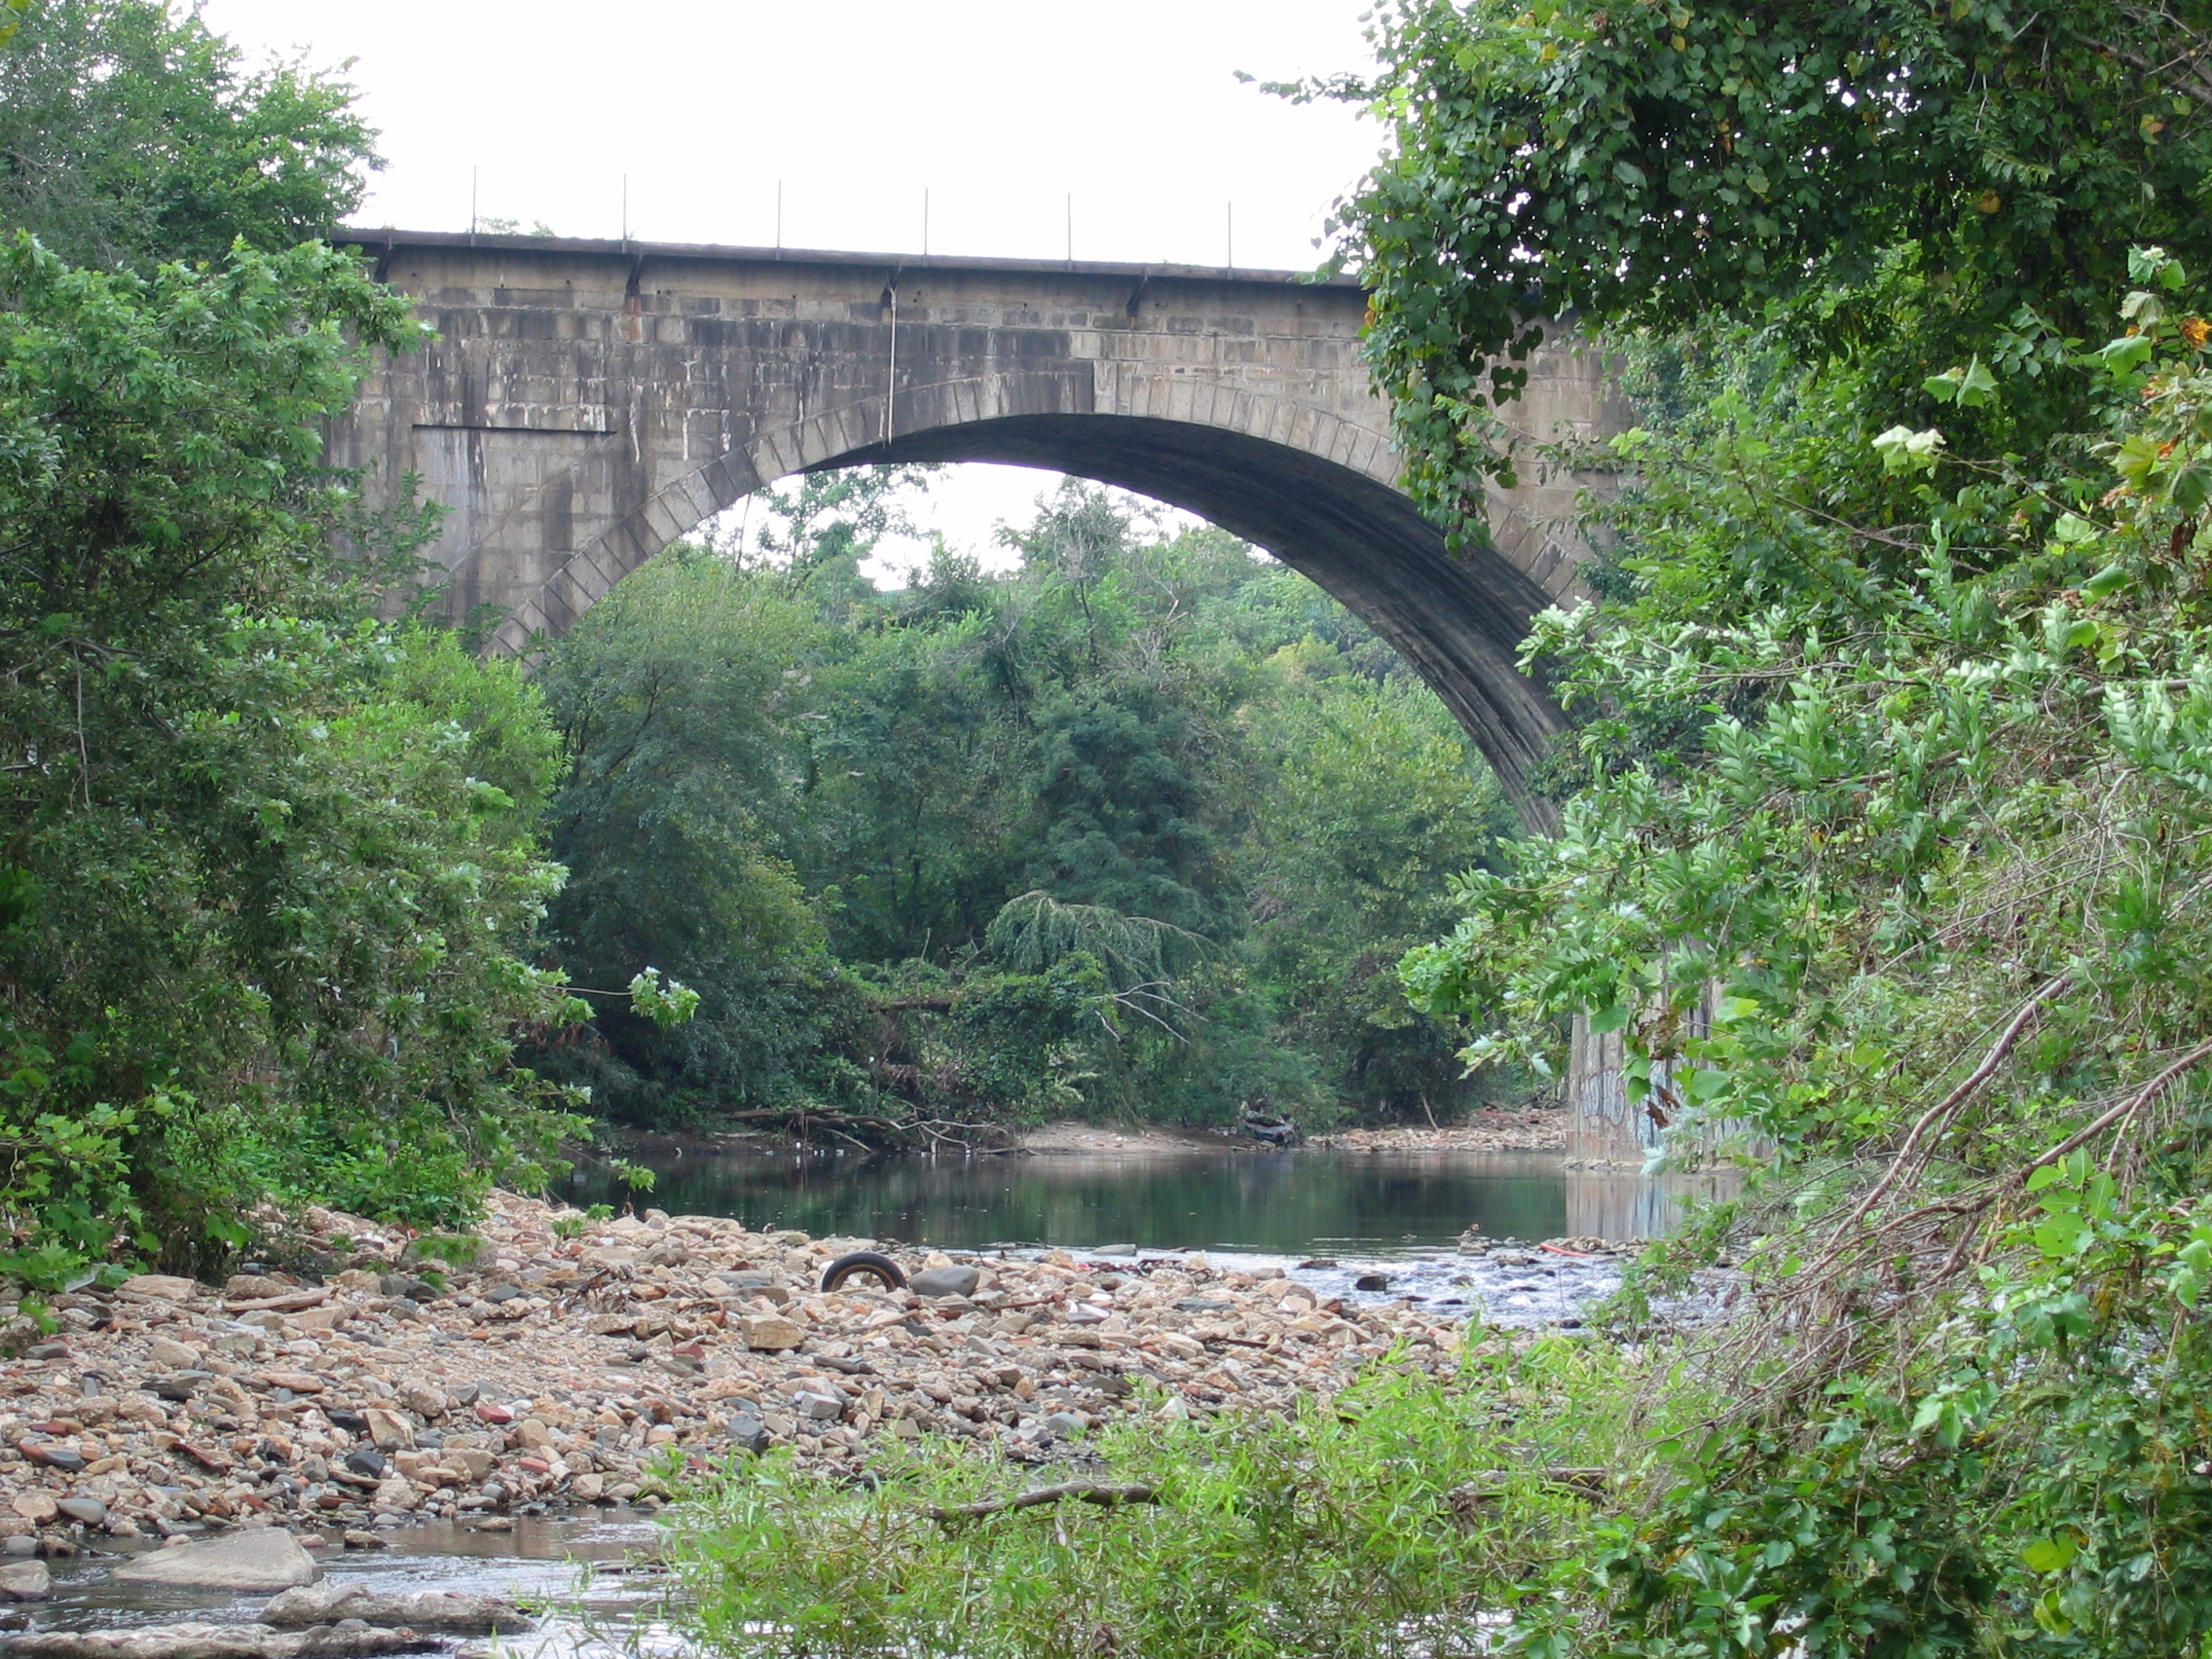 Engineer's Guide to Baltimore: Carrollton Viaduct